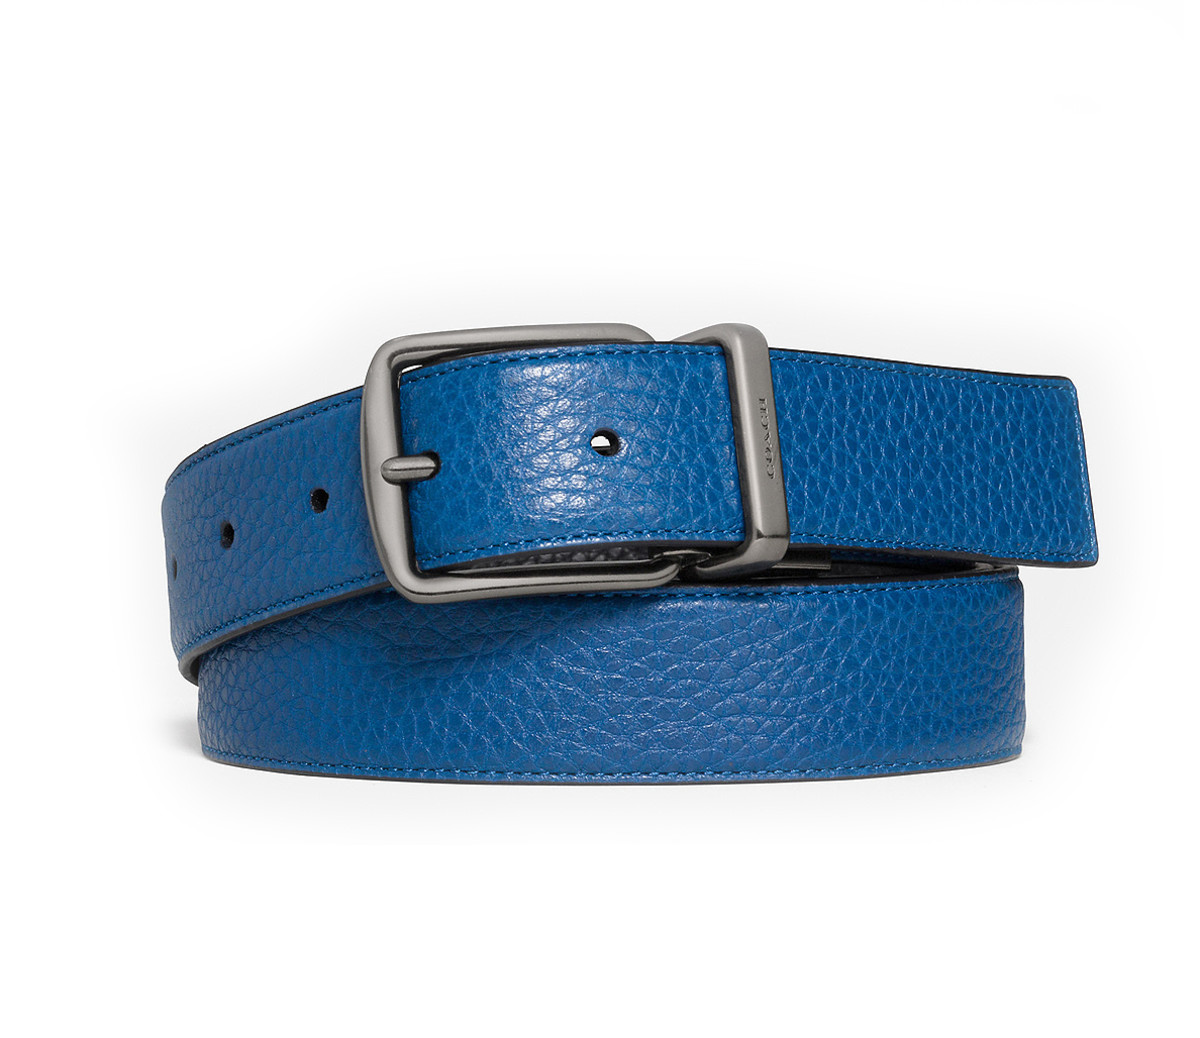 6 Bold Belts to Amp Up Your Work Wardrobe - Men's Journal